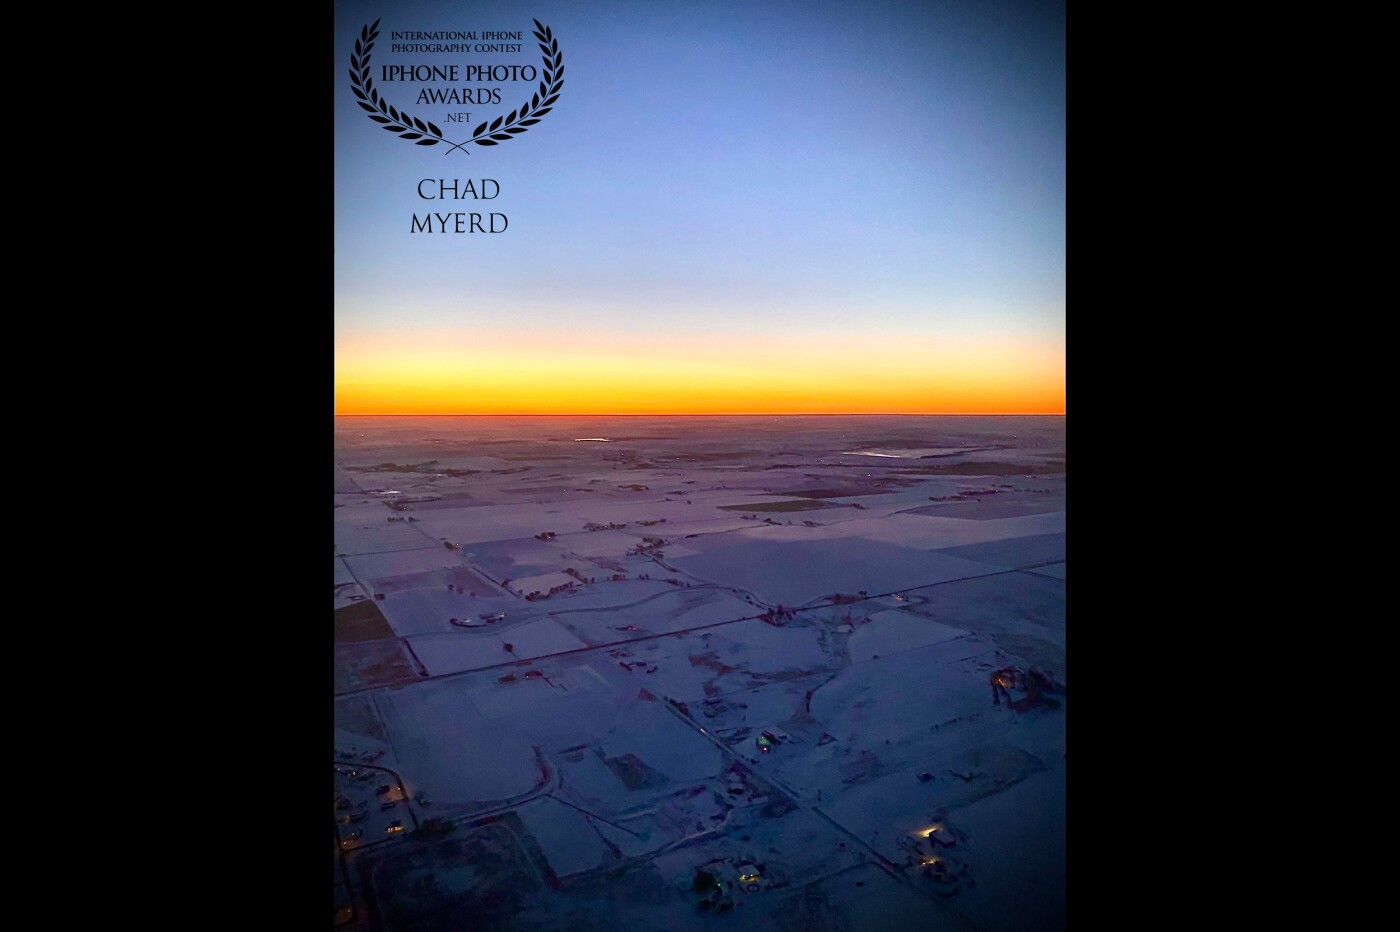 The beautiful Colorado sunrise on my way home from work.   I  took this from the plane window as we approached for our landing.  Enjoying the capabilities of the new 11 pro.